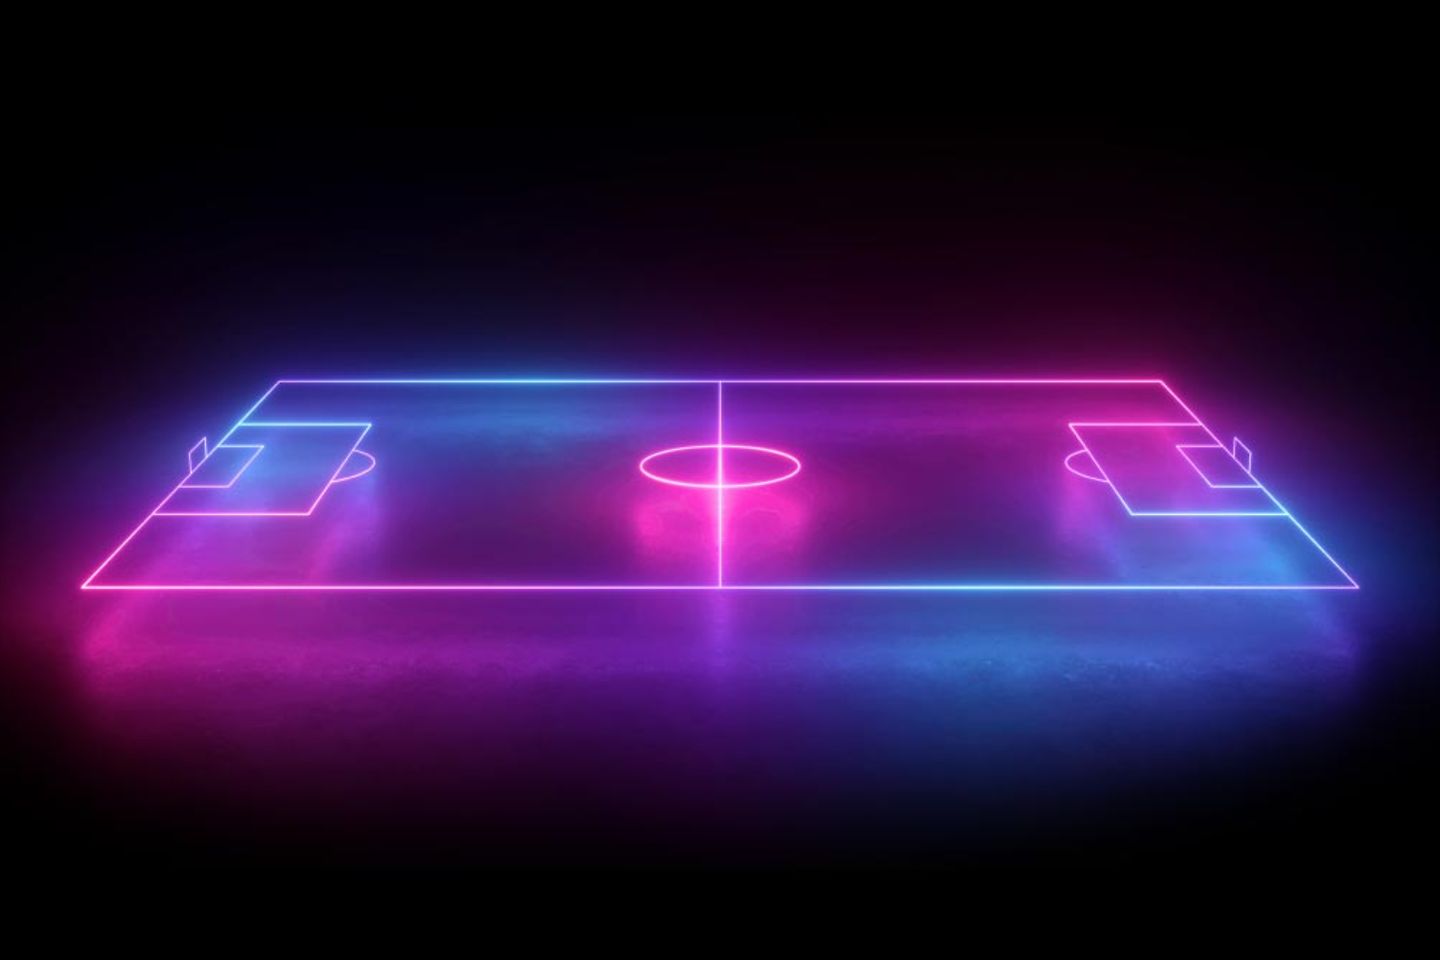 Soccer field diagram in blue and pink neon lines